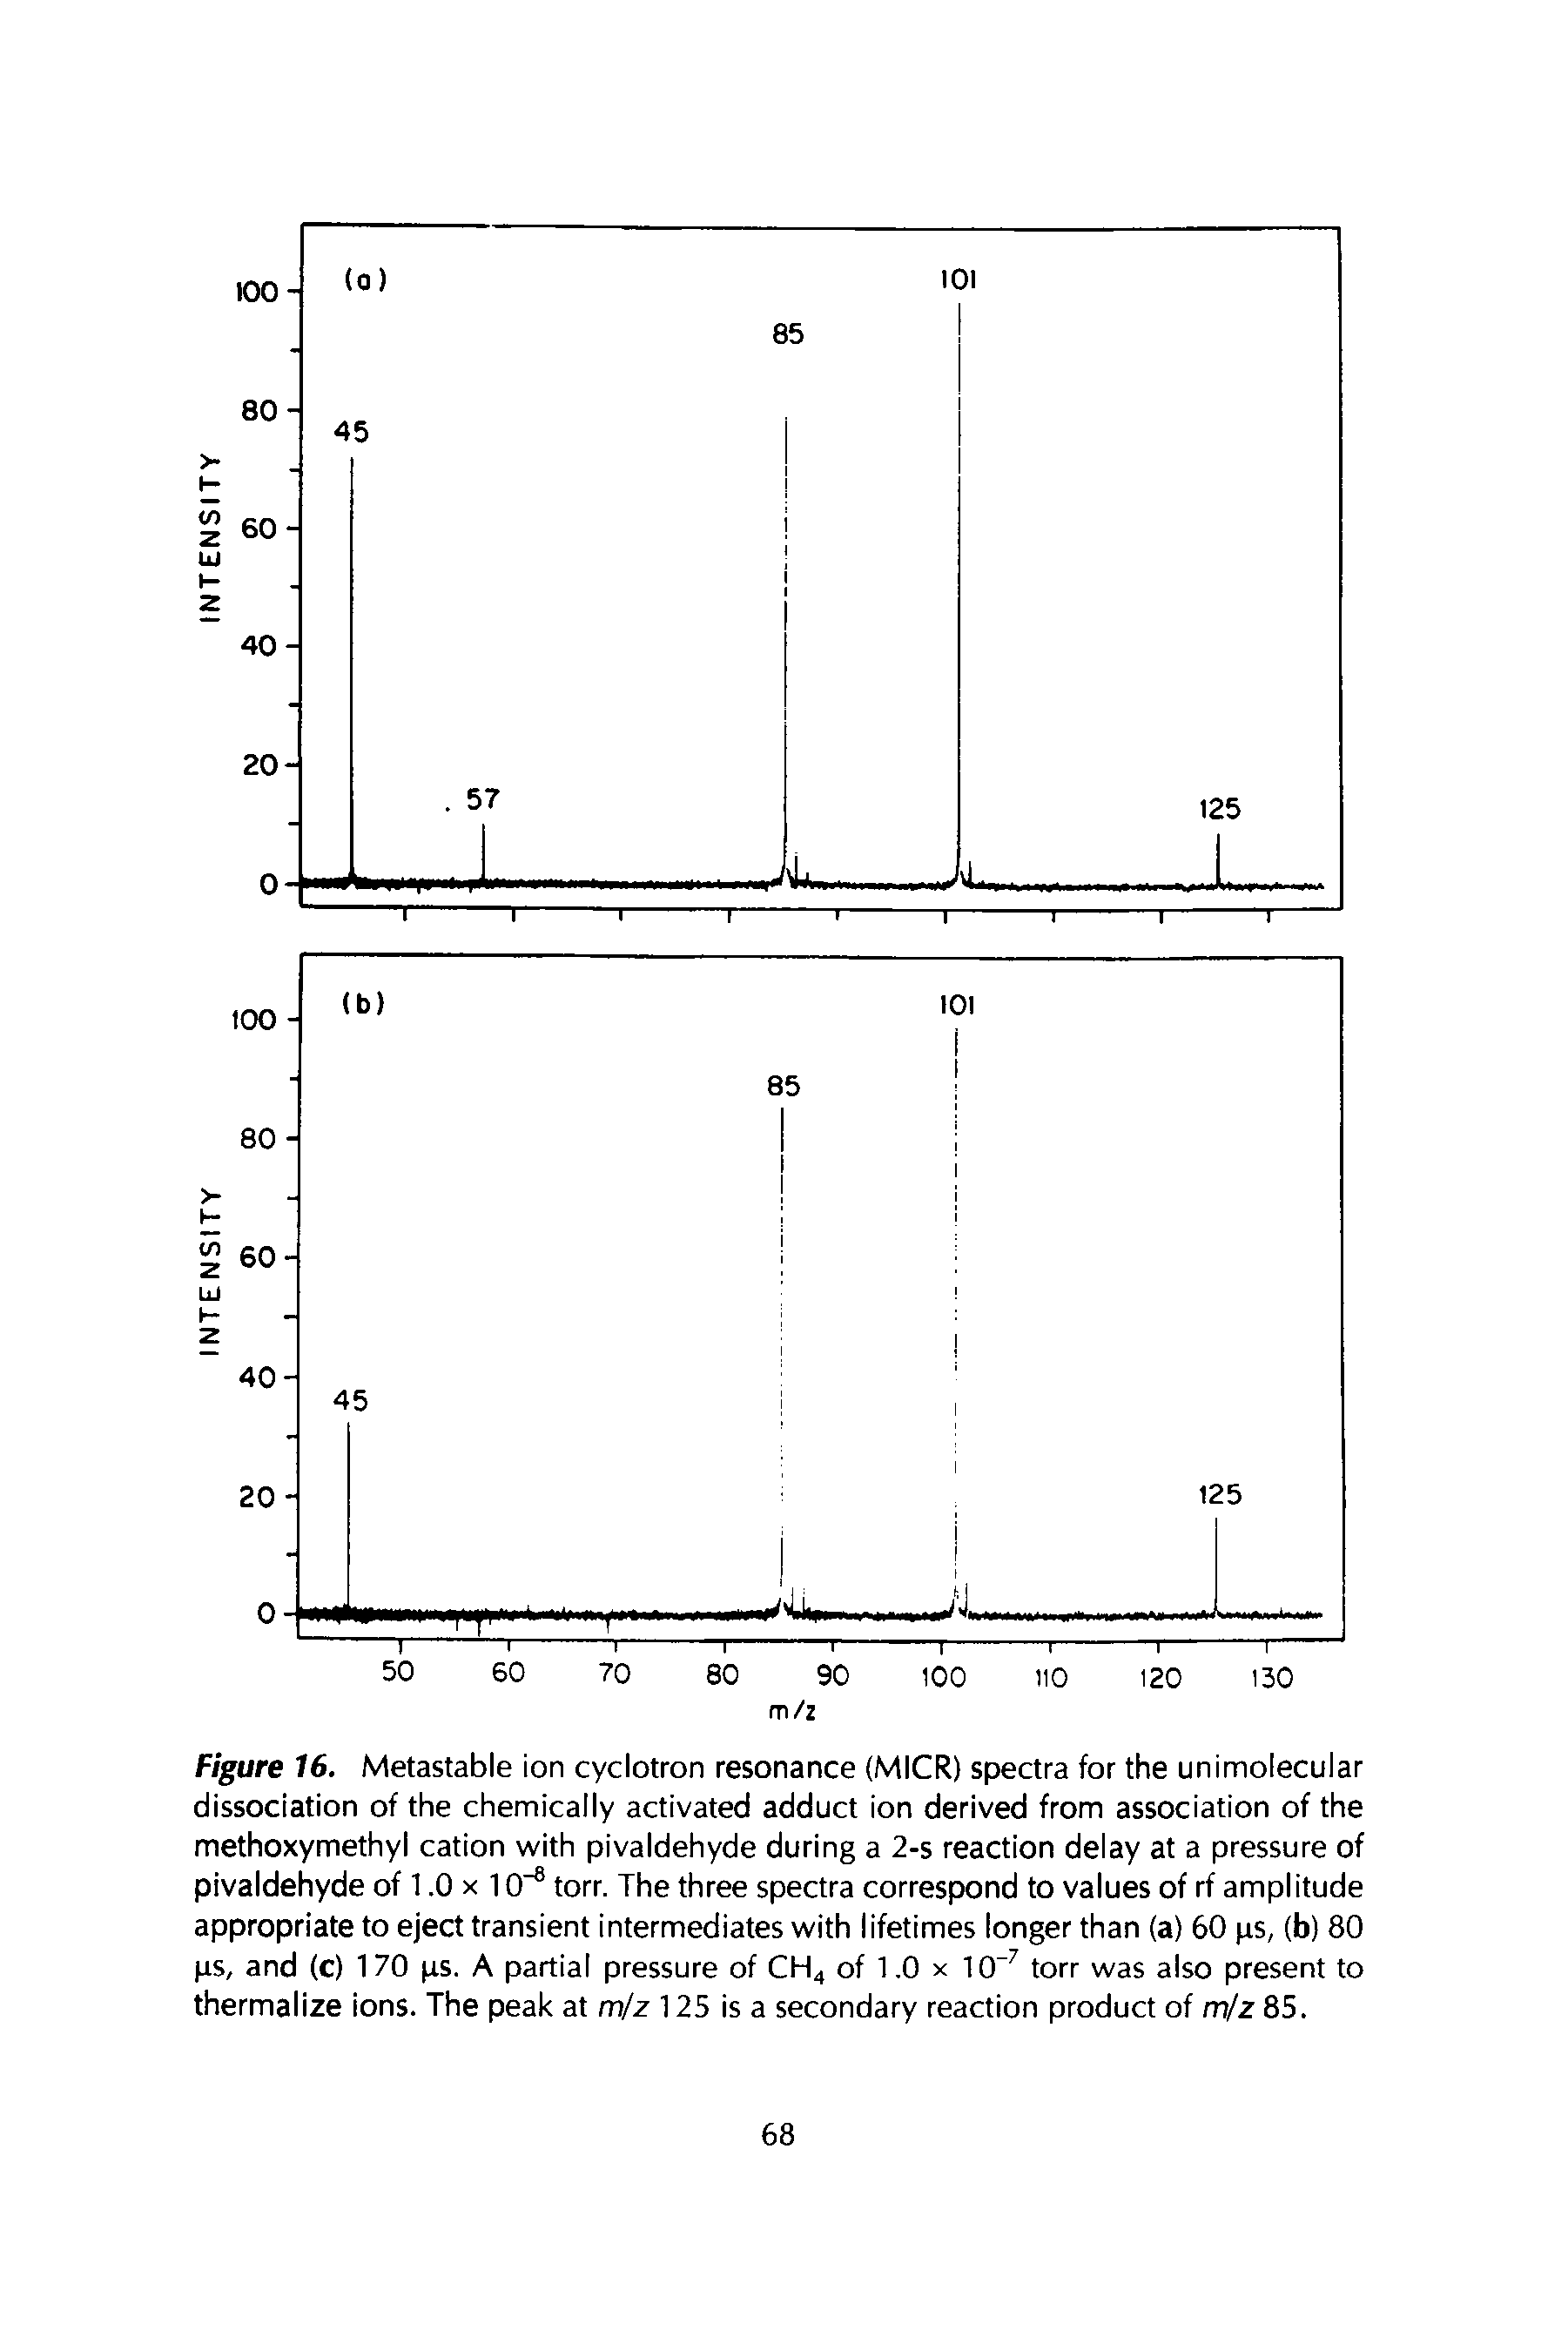 Figure 16. Metastable ion cyclotron resonance (MICR) spectra for the unimolecular dissociation of the chemically activated adduct ion derived from association of the methoxymethyl cation with pivaldehyde during a 2-s reaction delay at a pressure of pivaldehyde of 1.0 x 10 torr. The three spectra correspond to values of rf amplitude appropriate to eject transient intermediates with lifetimes longer than (a) 60 ps, (b) 80 ps, and (c) 1 70 ps. A partial pressure of CH4 of 1.0 x 10 torr was also present to thermalize ions. The peak at m/z 125 is a secondary reaction product of m/z 85.